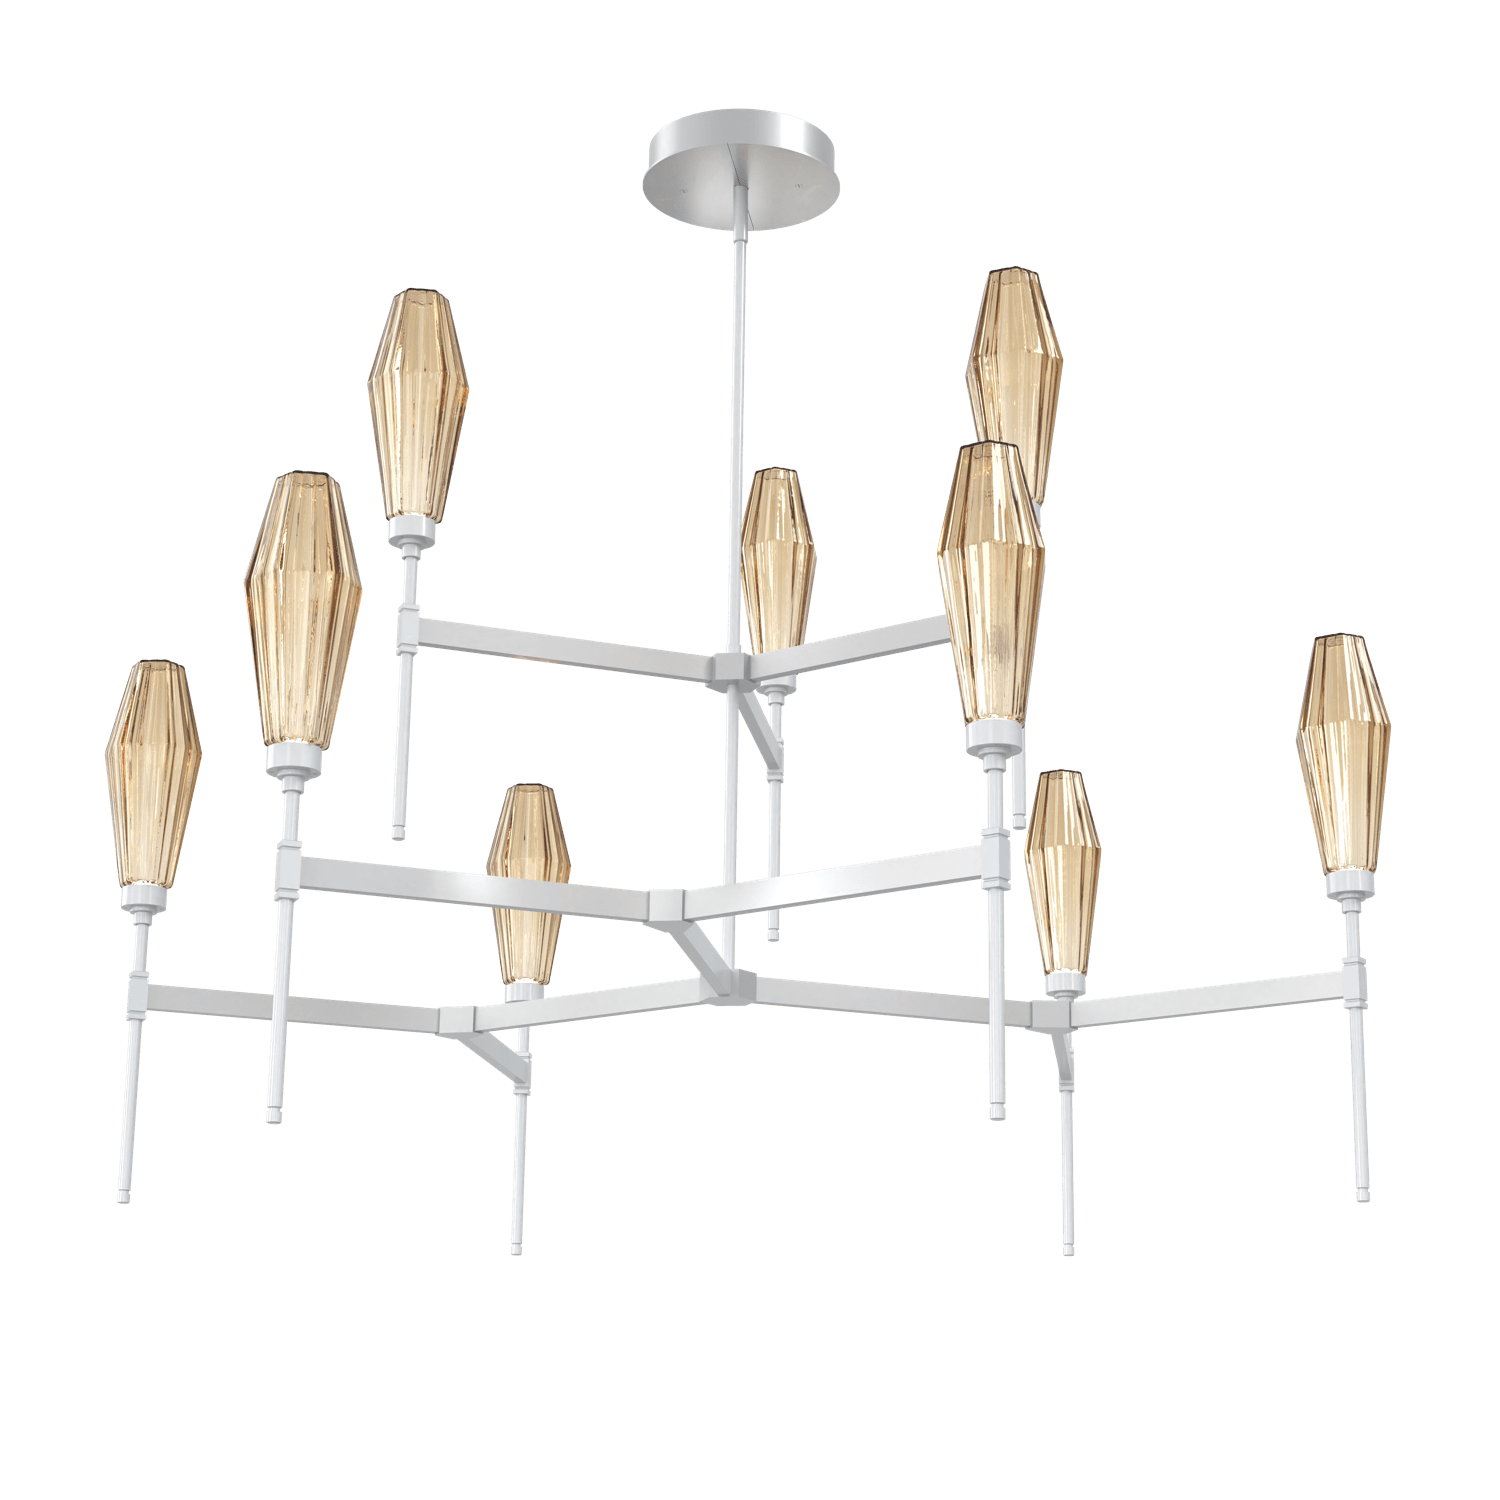 CHB0049-54-CS-RB-Hammerton-Studio-Aalto-54-inch-round-two-tier-belvedere-chandelier-with-classic-silver-finish-and-optic-ribbed-bronze-glass-shades-and-LED-lamping